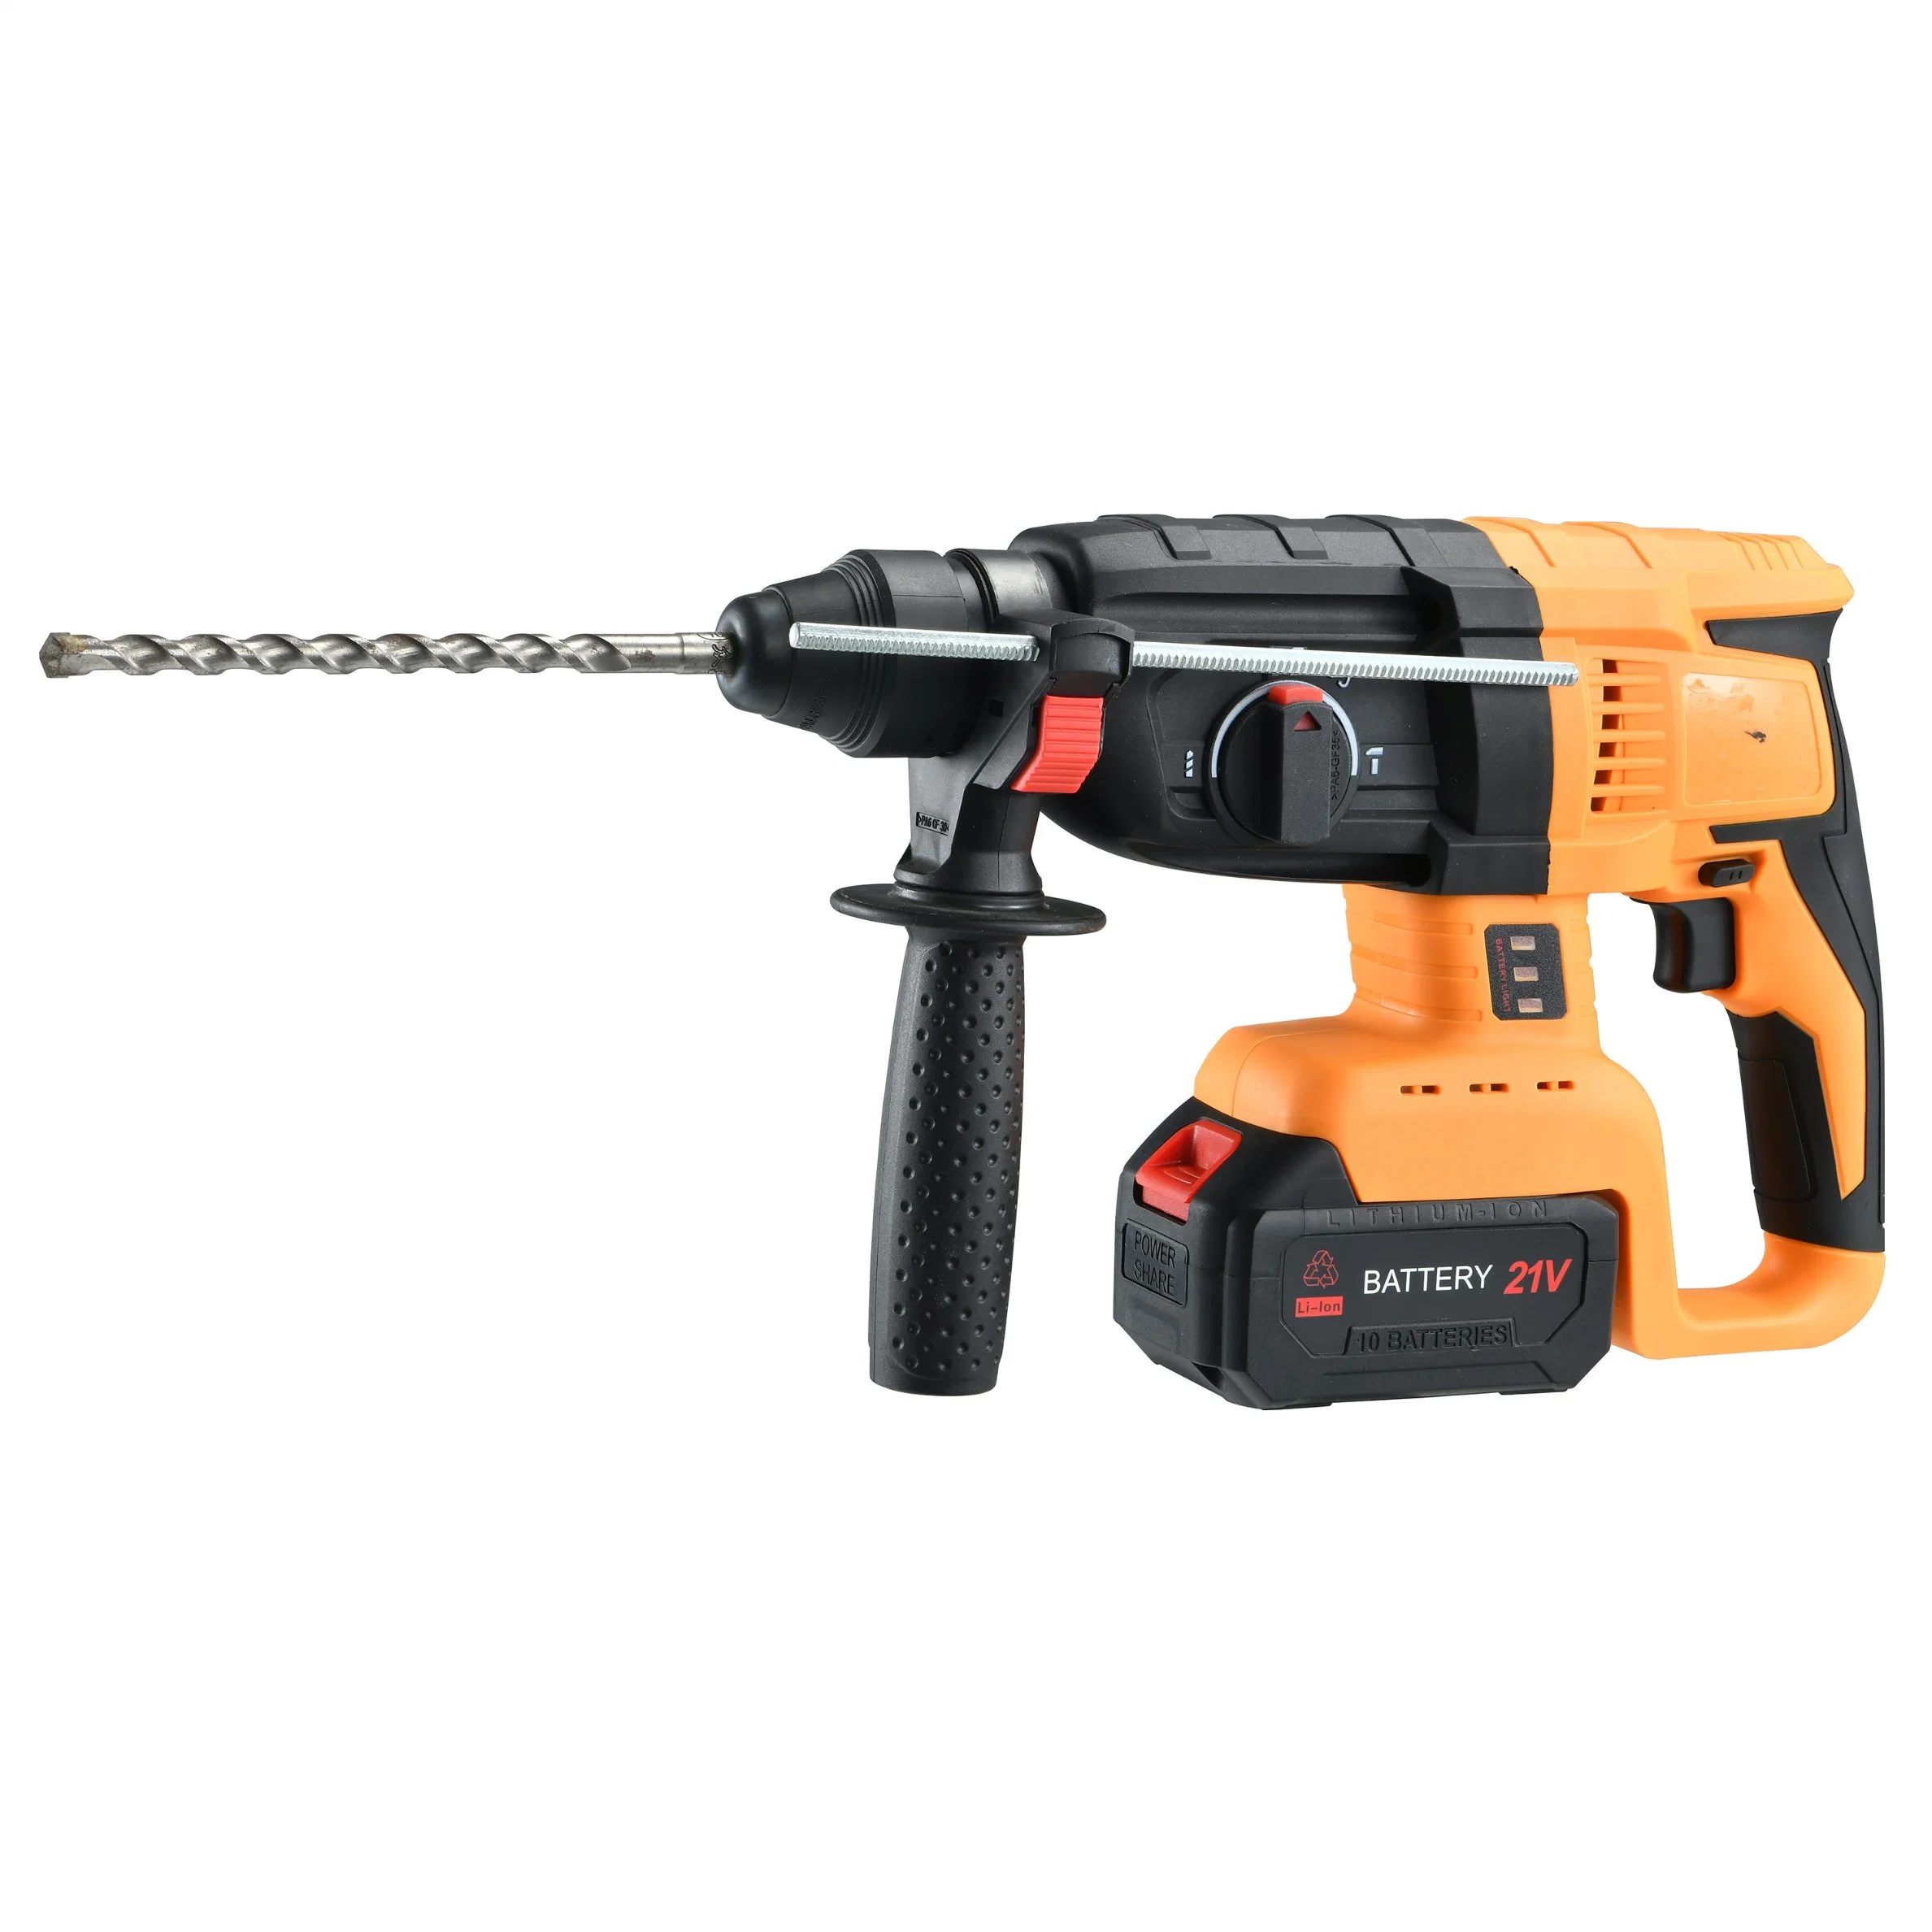 21V Cordless Lithium Electric Hammer Drill with Impact/Hammer Function